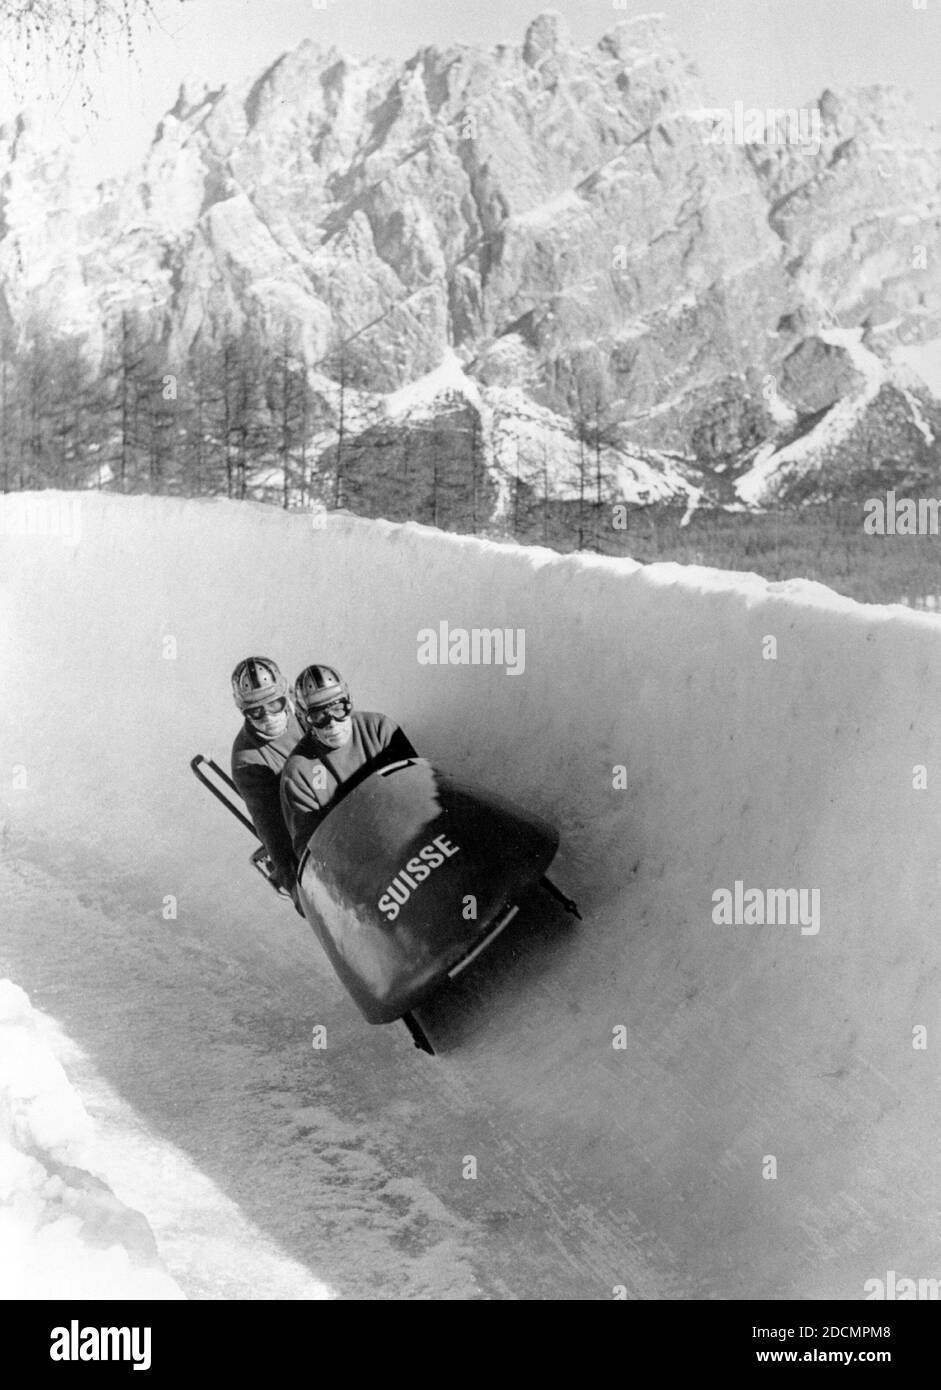 1956 Winter Olympics. Bobsleigh two-man competitions. In the photo: Max Angst and Harry Warburton (Svi), Cortina D'Ampezzo, 27/01/1956. --- Olimpiadi Invernali 1956. Bob a 2. Nella foto: Max Angst e Harry Warburton (Svi), Cortina D'Ampezzo, 27/01/1956. Stock Photo